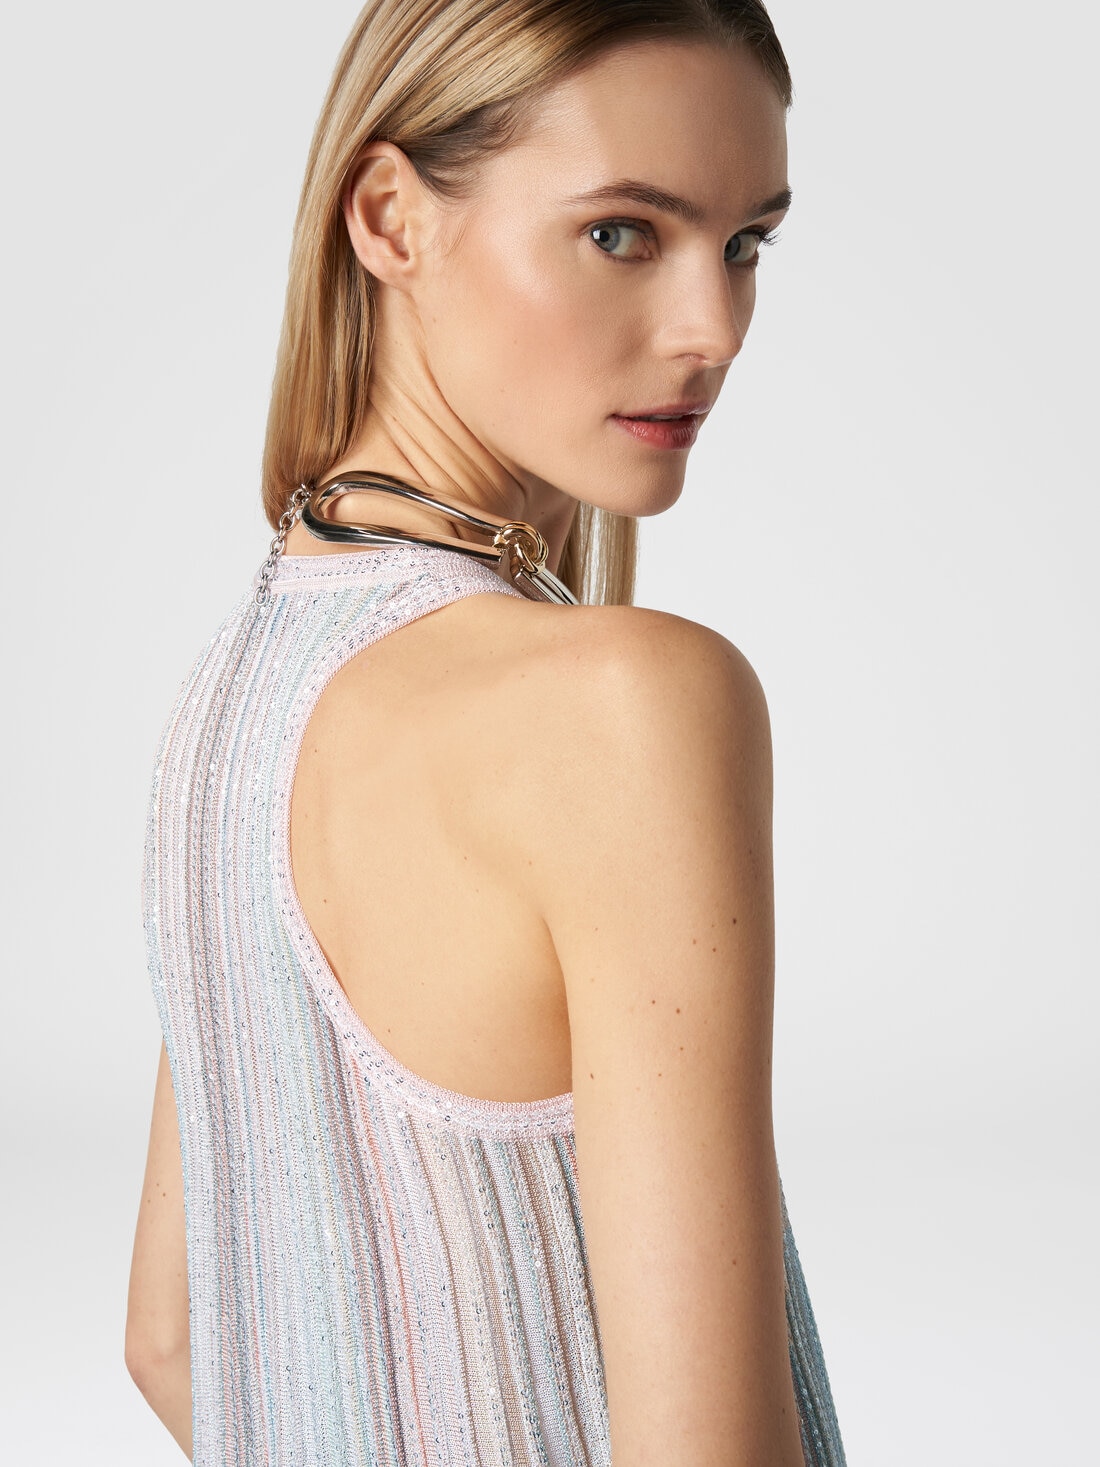 Tank top in vertical striped knit with sequins , Multicoloured  - DS24SK01BK033MSM9AH - 4